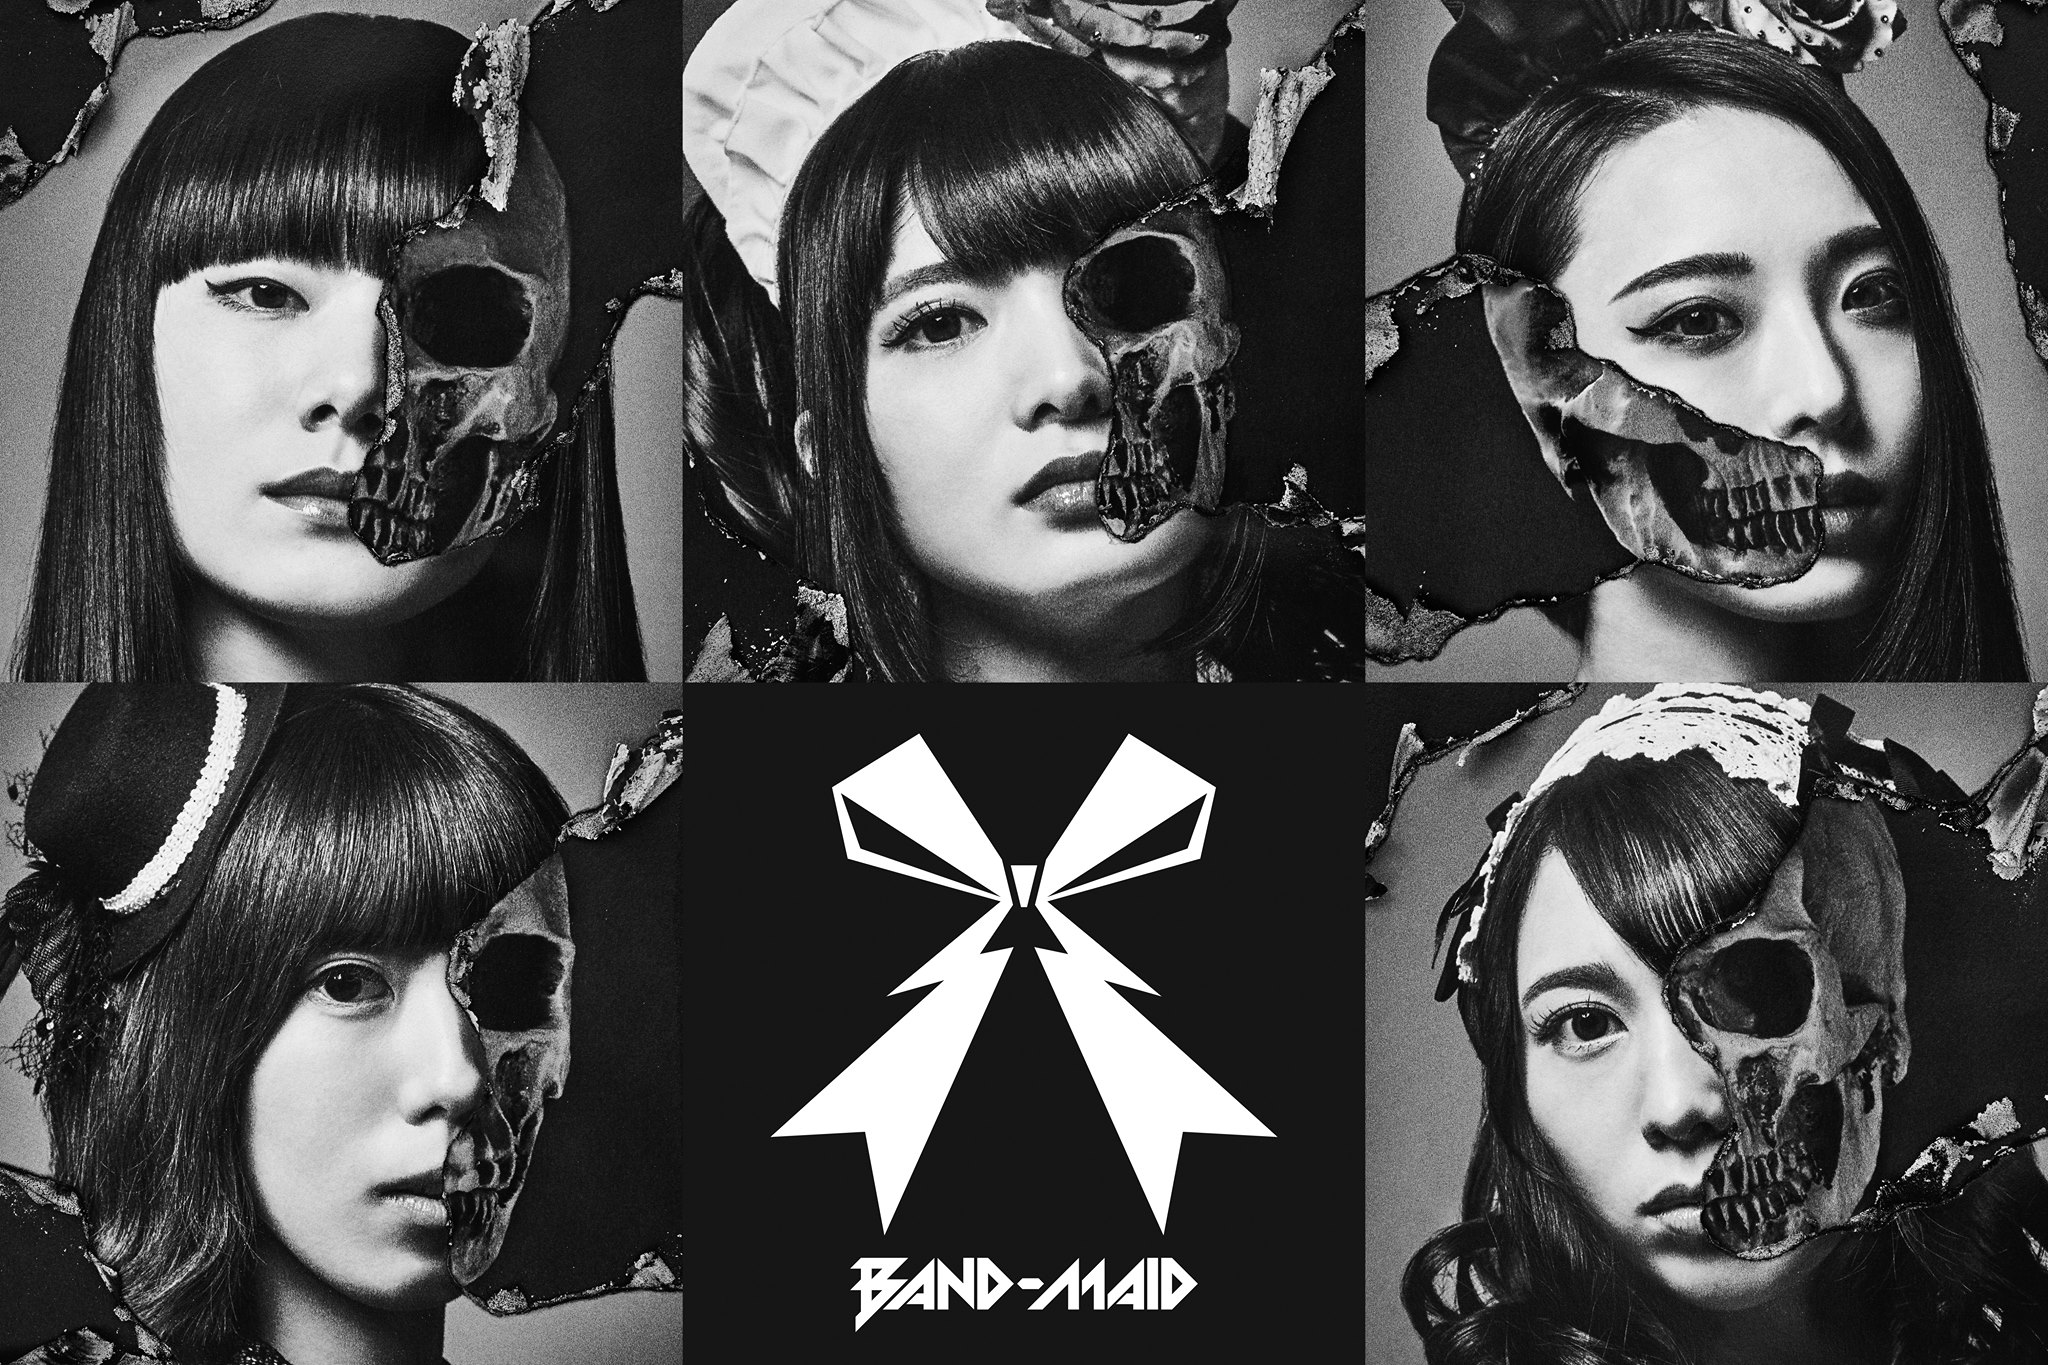 BAND-MAID Maid in Japan